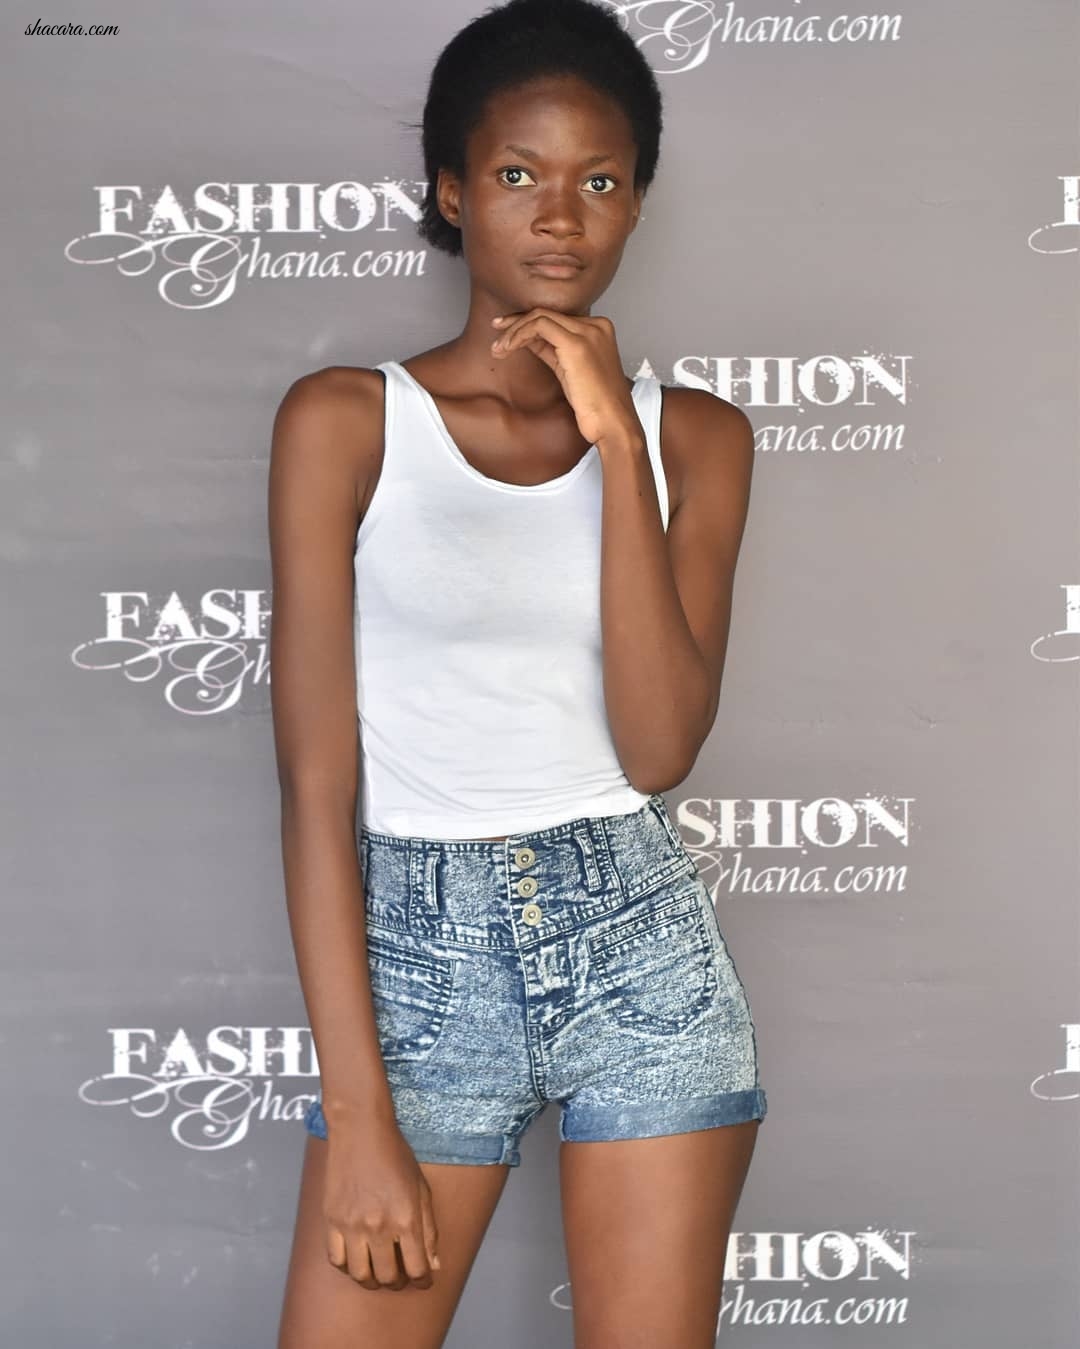 Accra Fashion Week Raises The Standards Once More With An Amazing Selection Of Hot Models From It’s Casting